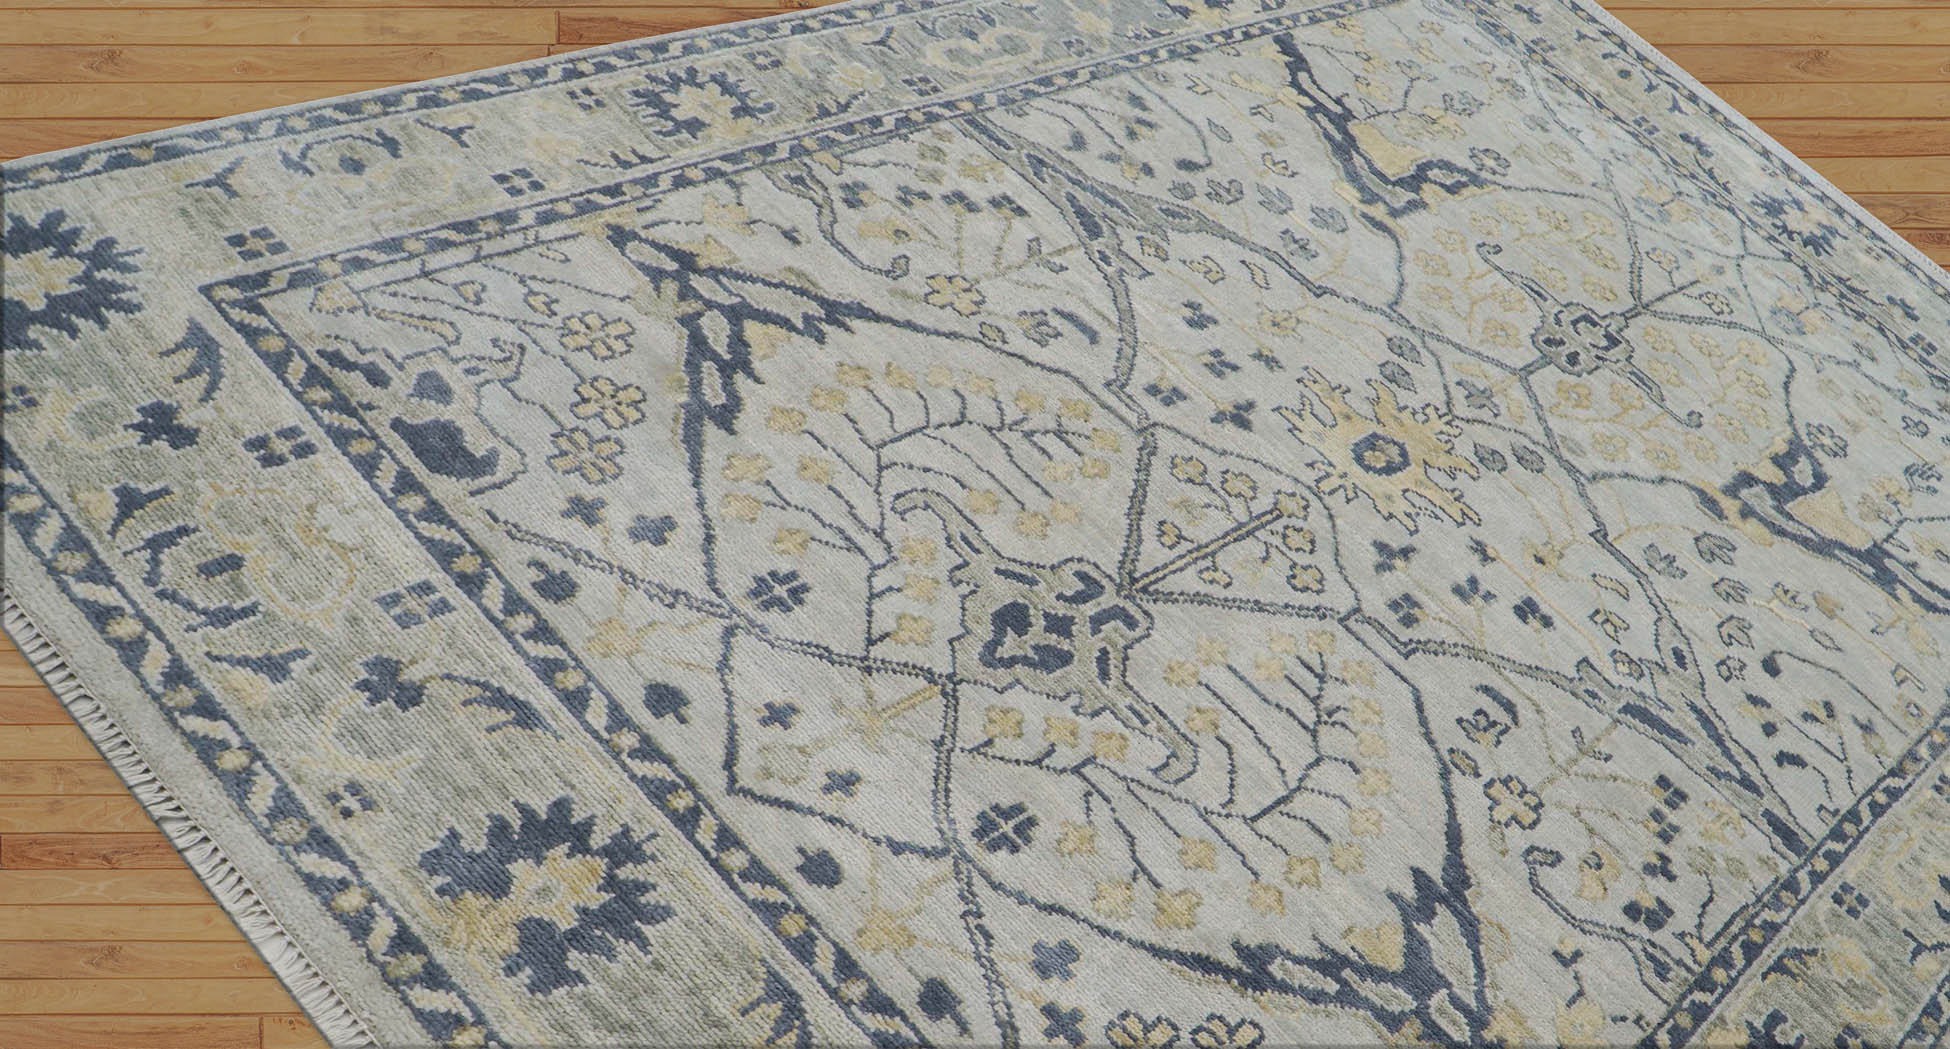 Deveaux 9x12 Hand Knotted Turkish Oushak  100% Wool Transitional Oriental Area Rug Bluish Gray, Beige Color